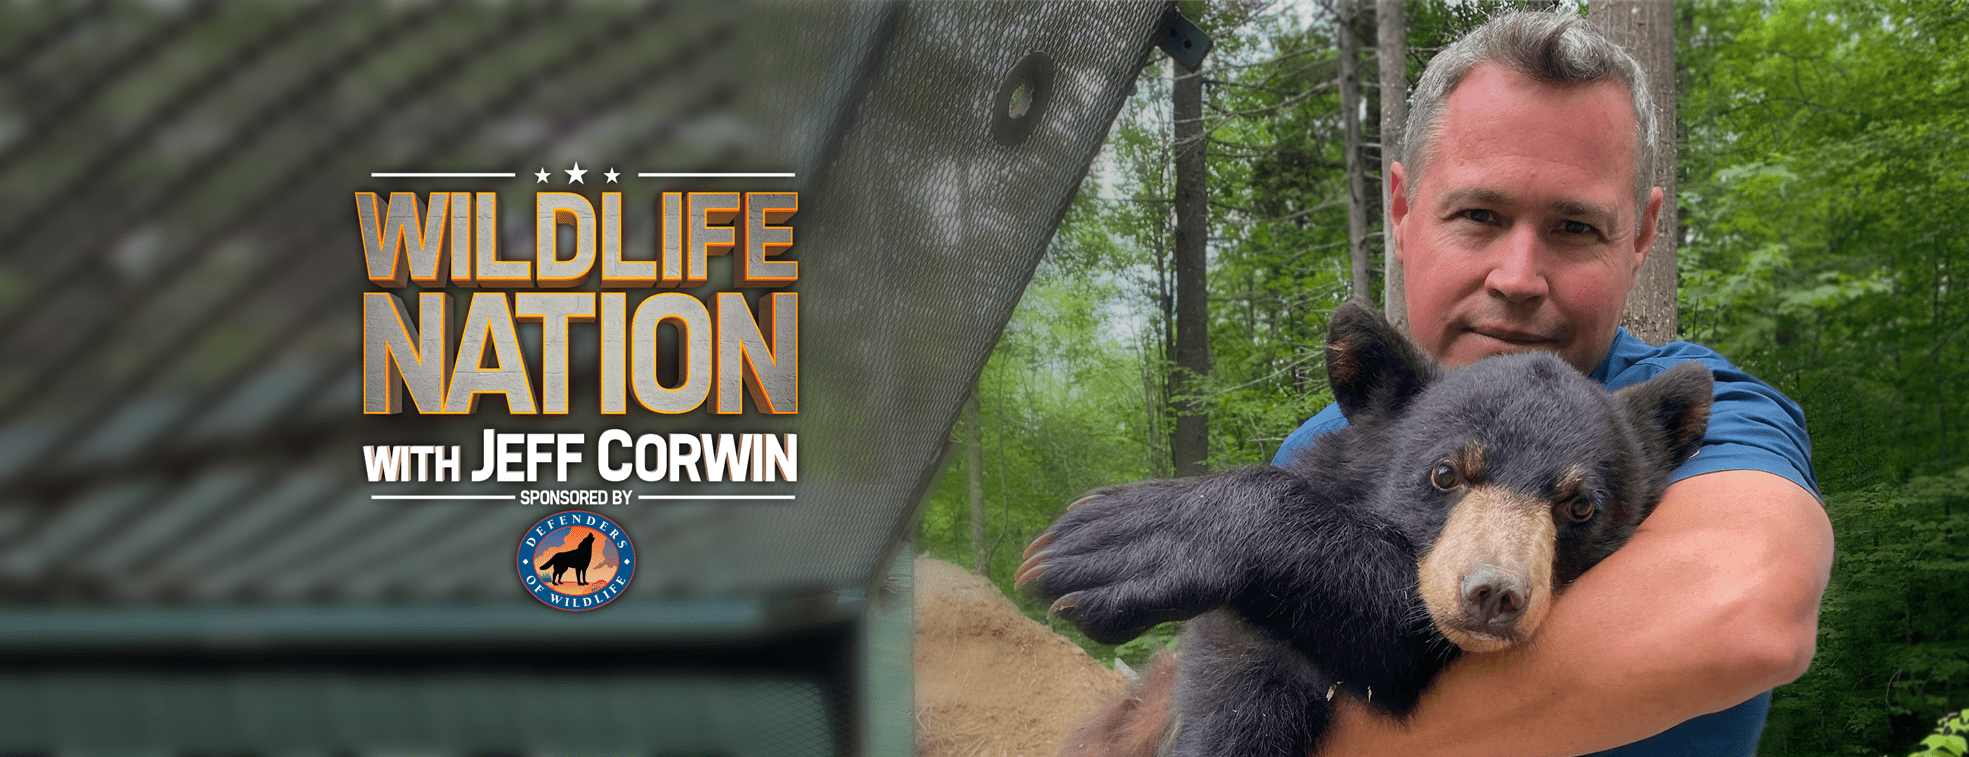 Wildlife Nation with Jeff Corwin, sponsored by Defenders of Wildlife